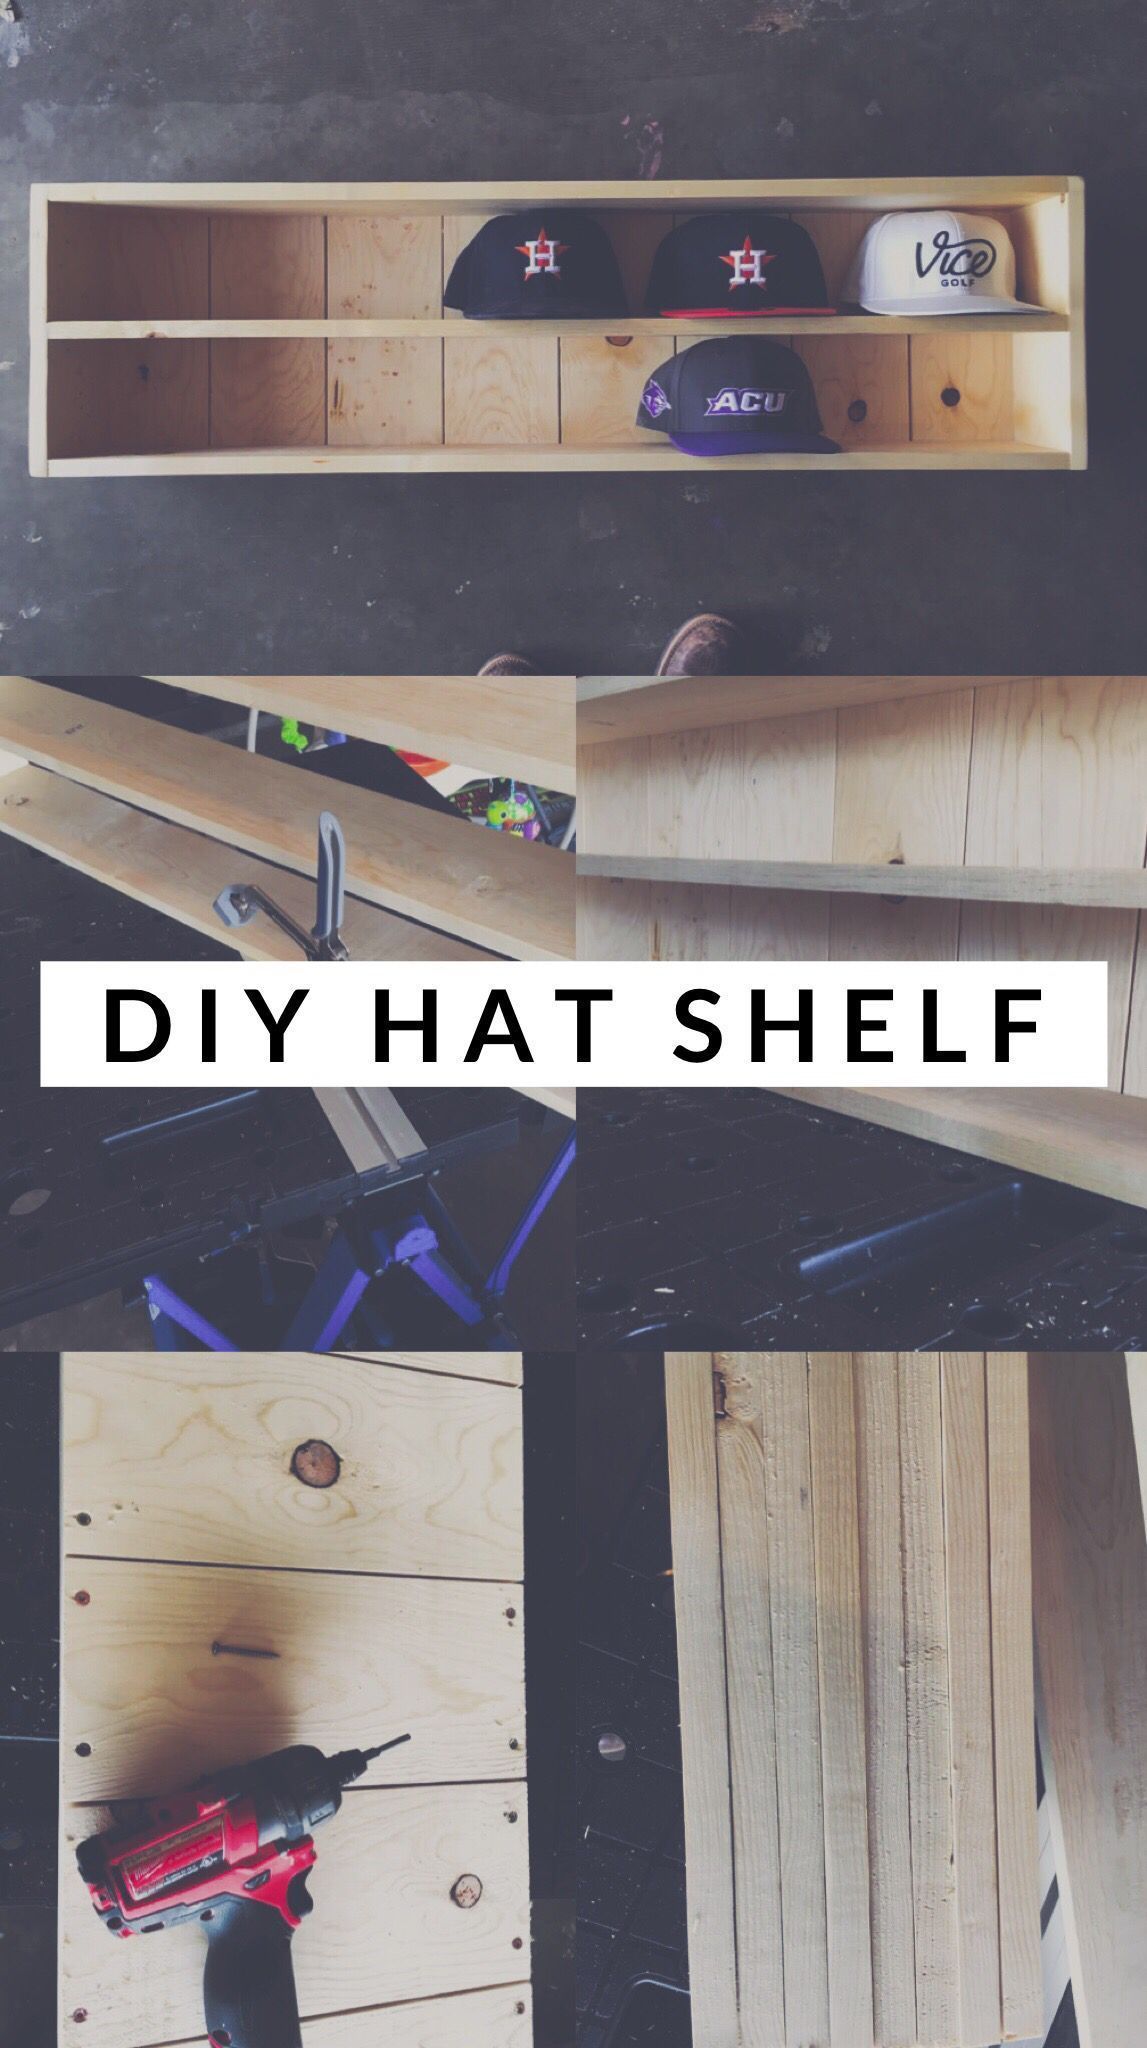 19 diy Projects with wood ideas